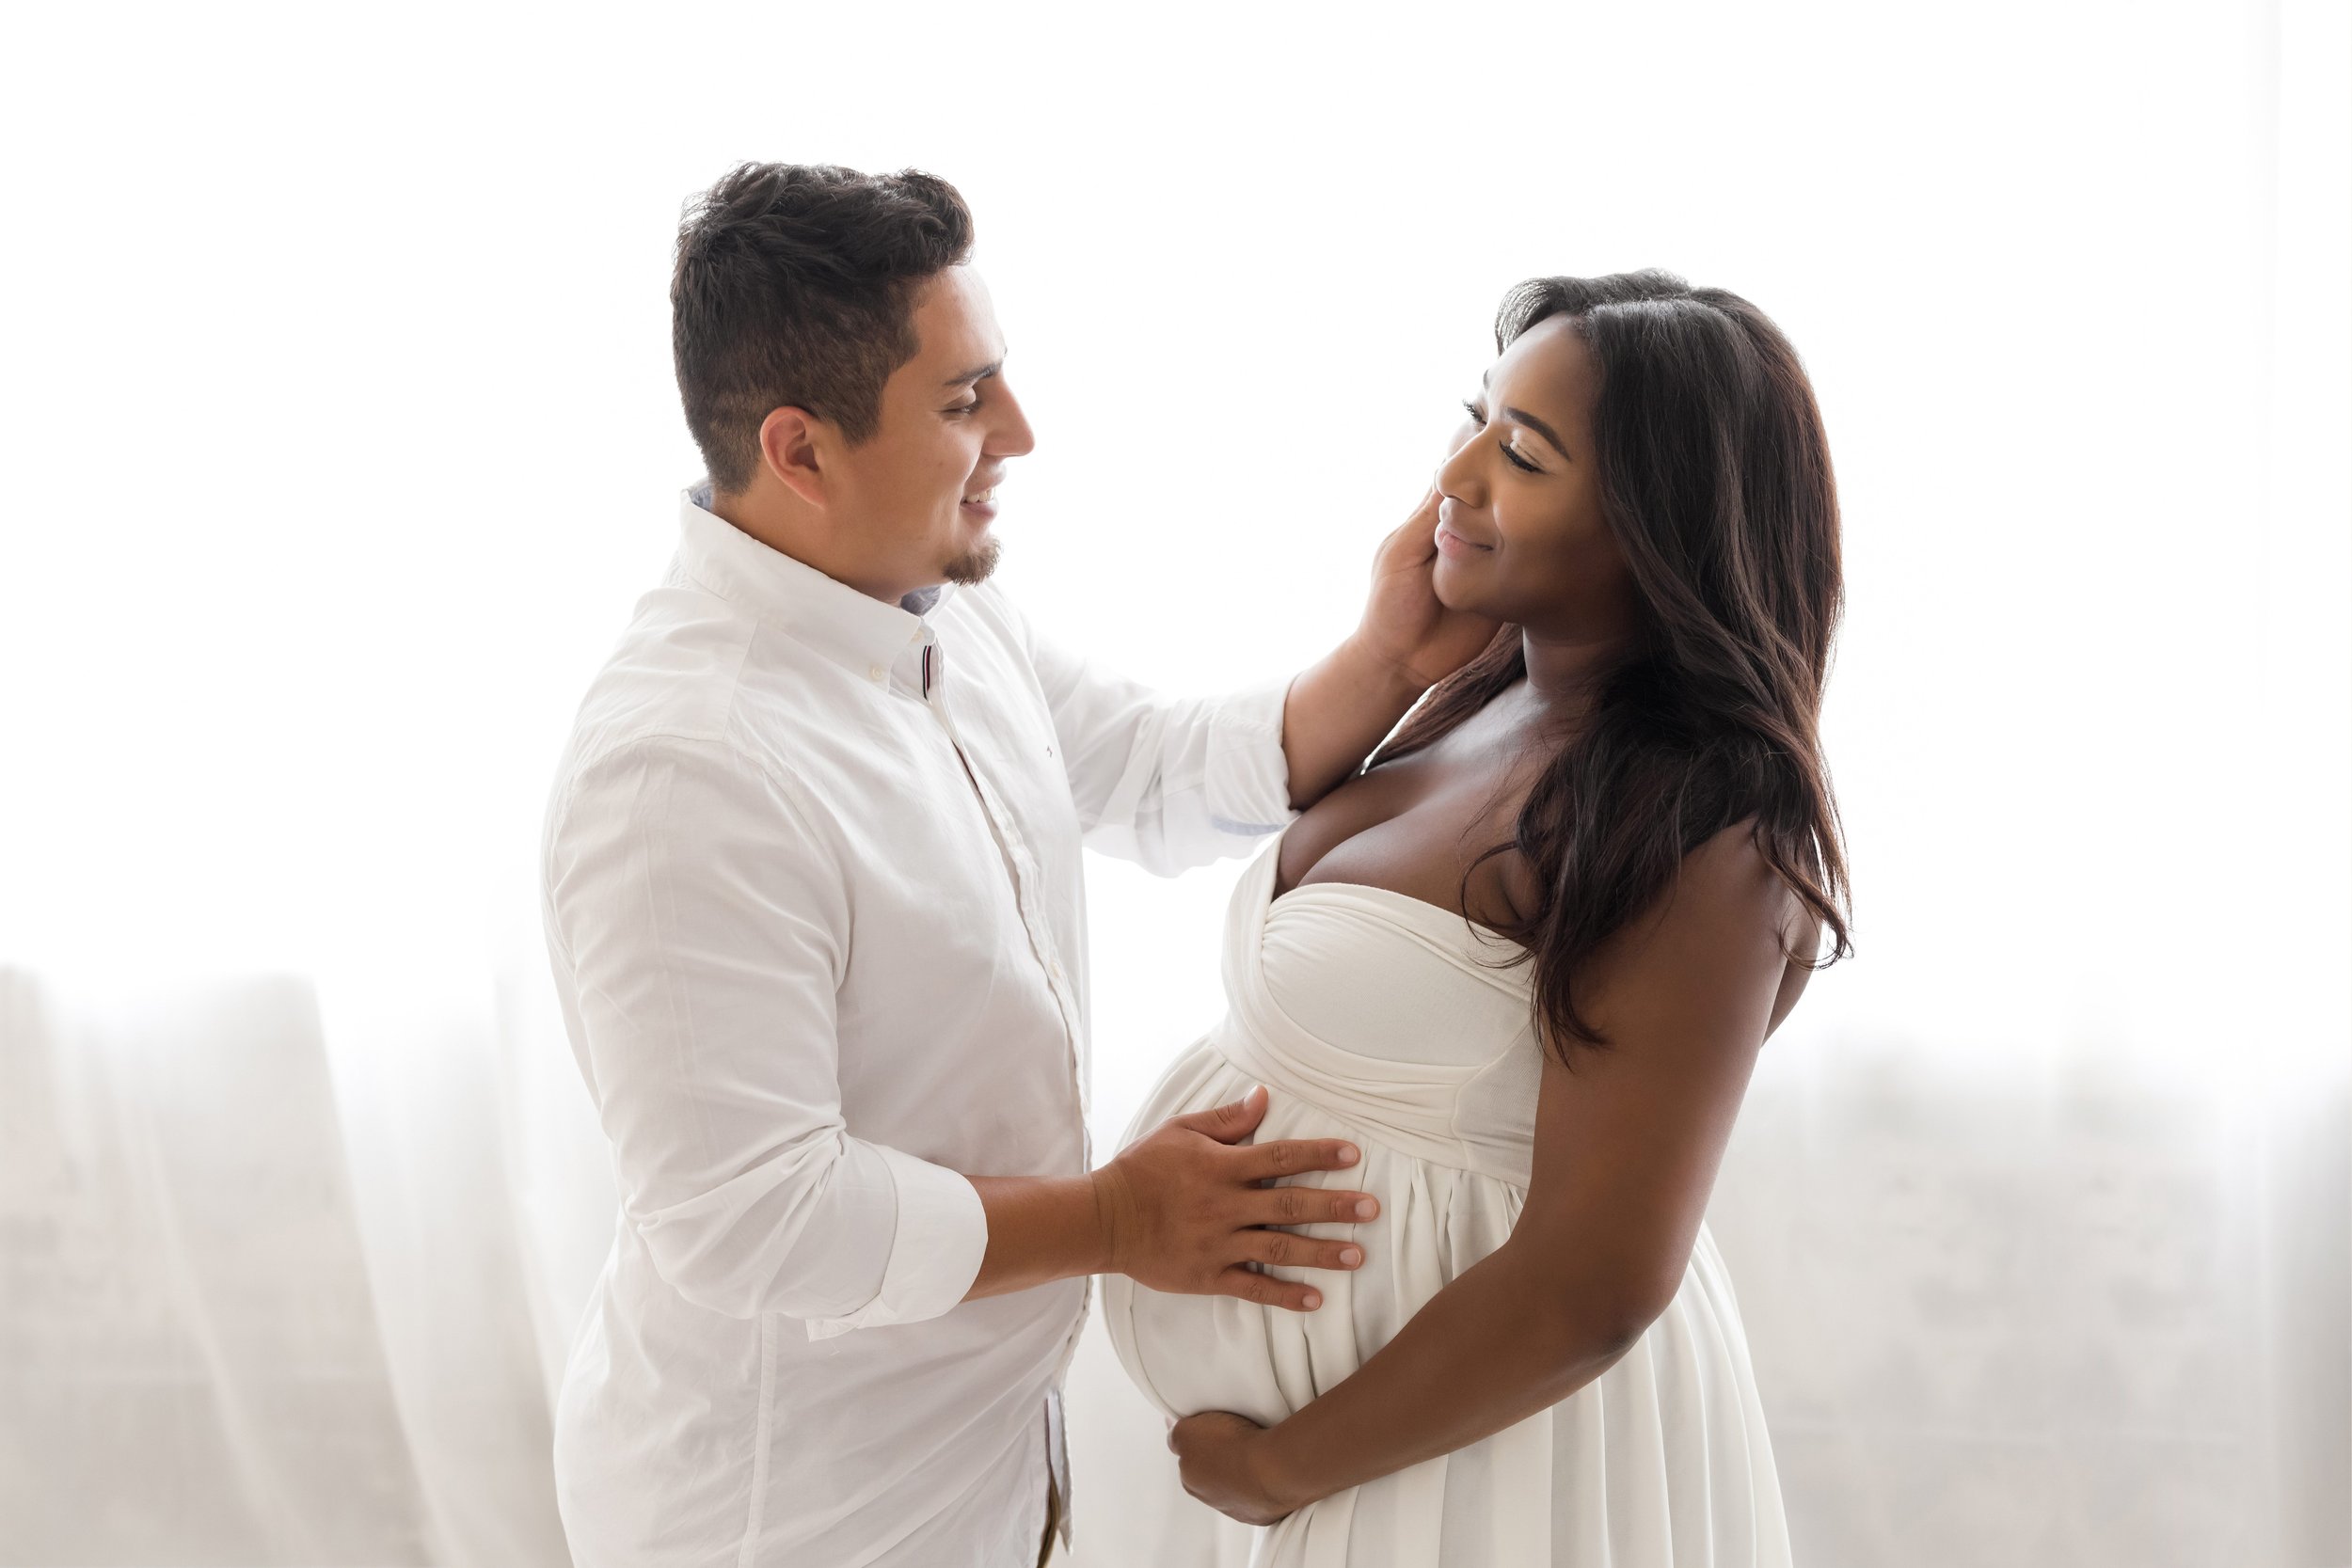  A husband stands facing his wife and places his left hand on his pregnant wife’s cheek while he places his right hand on her belly and the two contemplate the pending birth of their child.  The wife is wearing a strapless white maternity gown as she